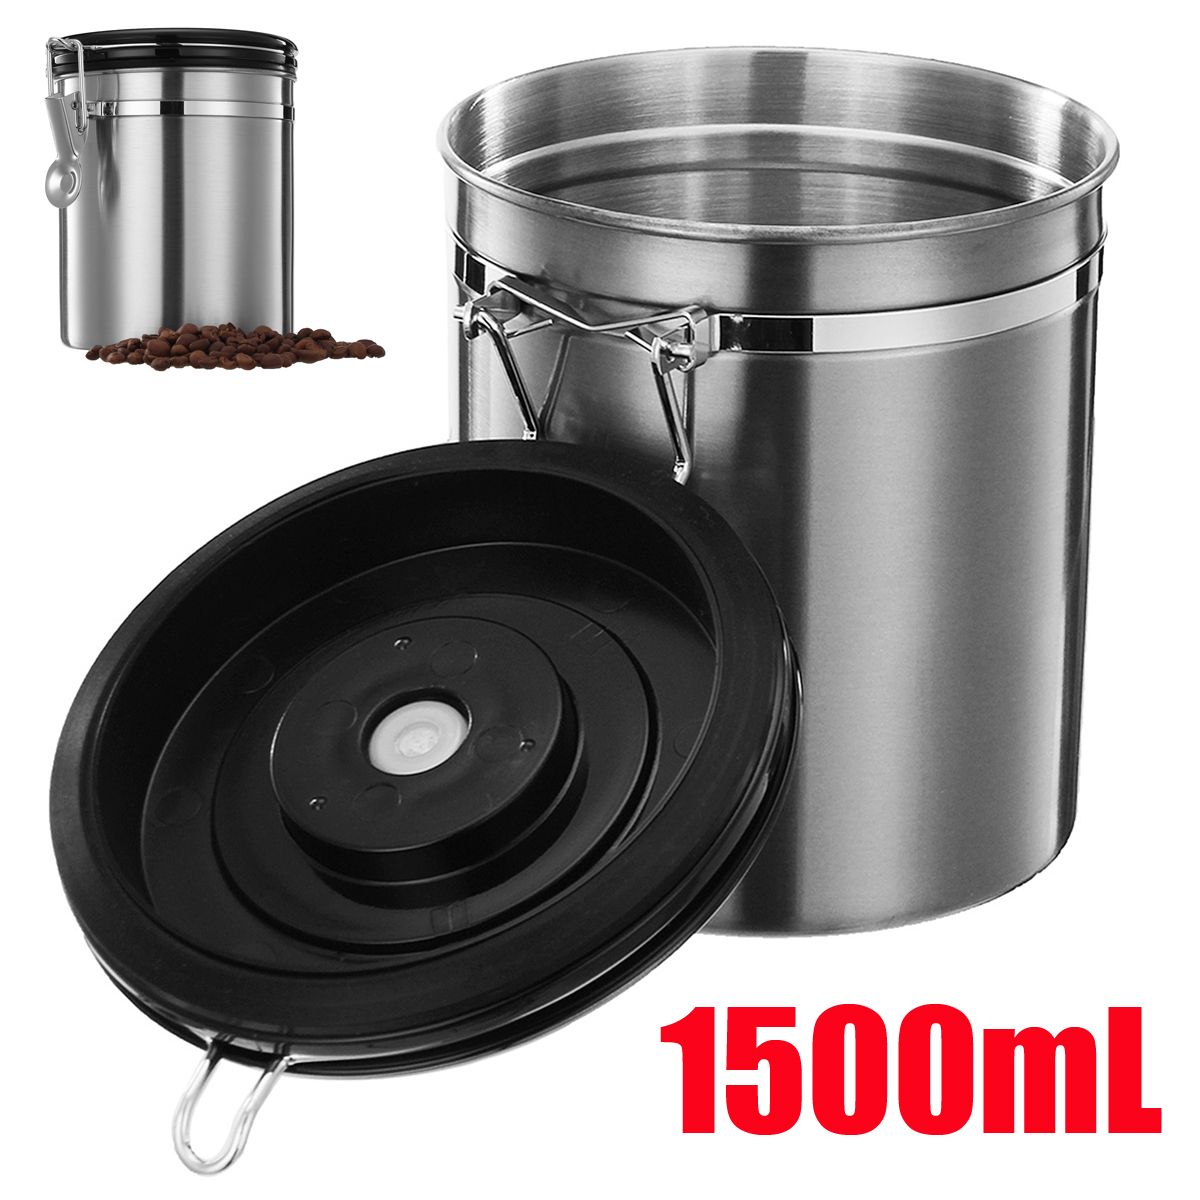 15L-Silver-Stainless-Steel-Sealed-Coffee-Bean-Tea-Storage-Canister-Kitchen-Storage-Container-1305839